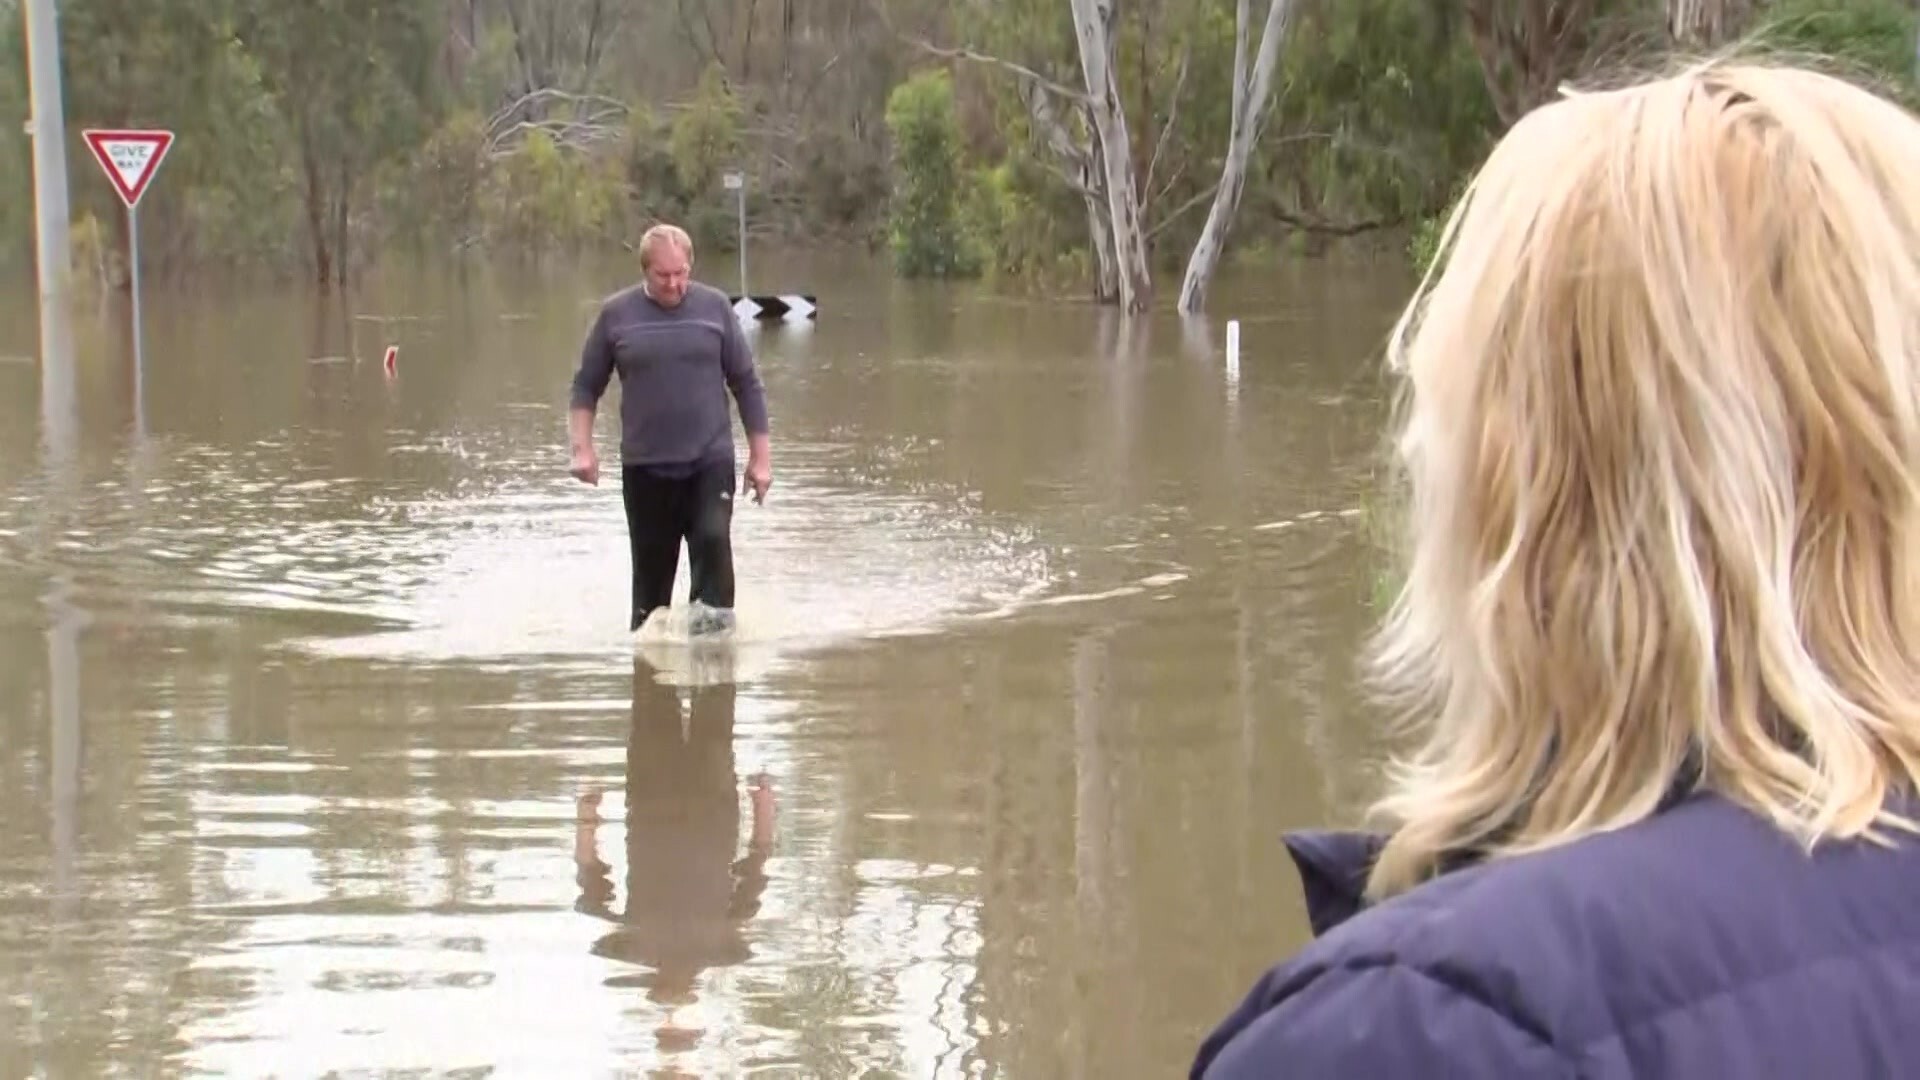 A man and woman standing in floodwaters.